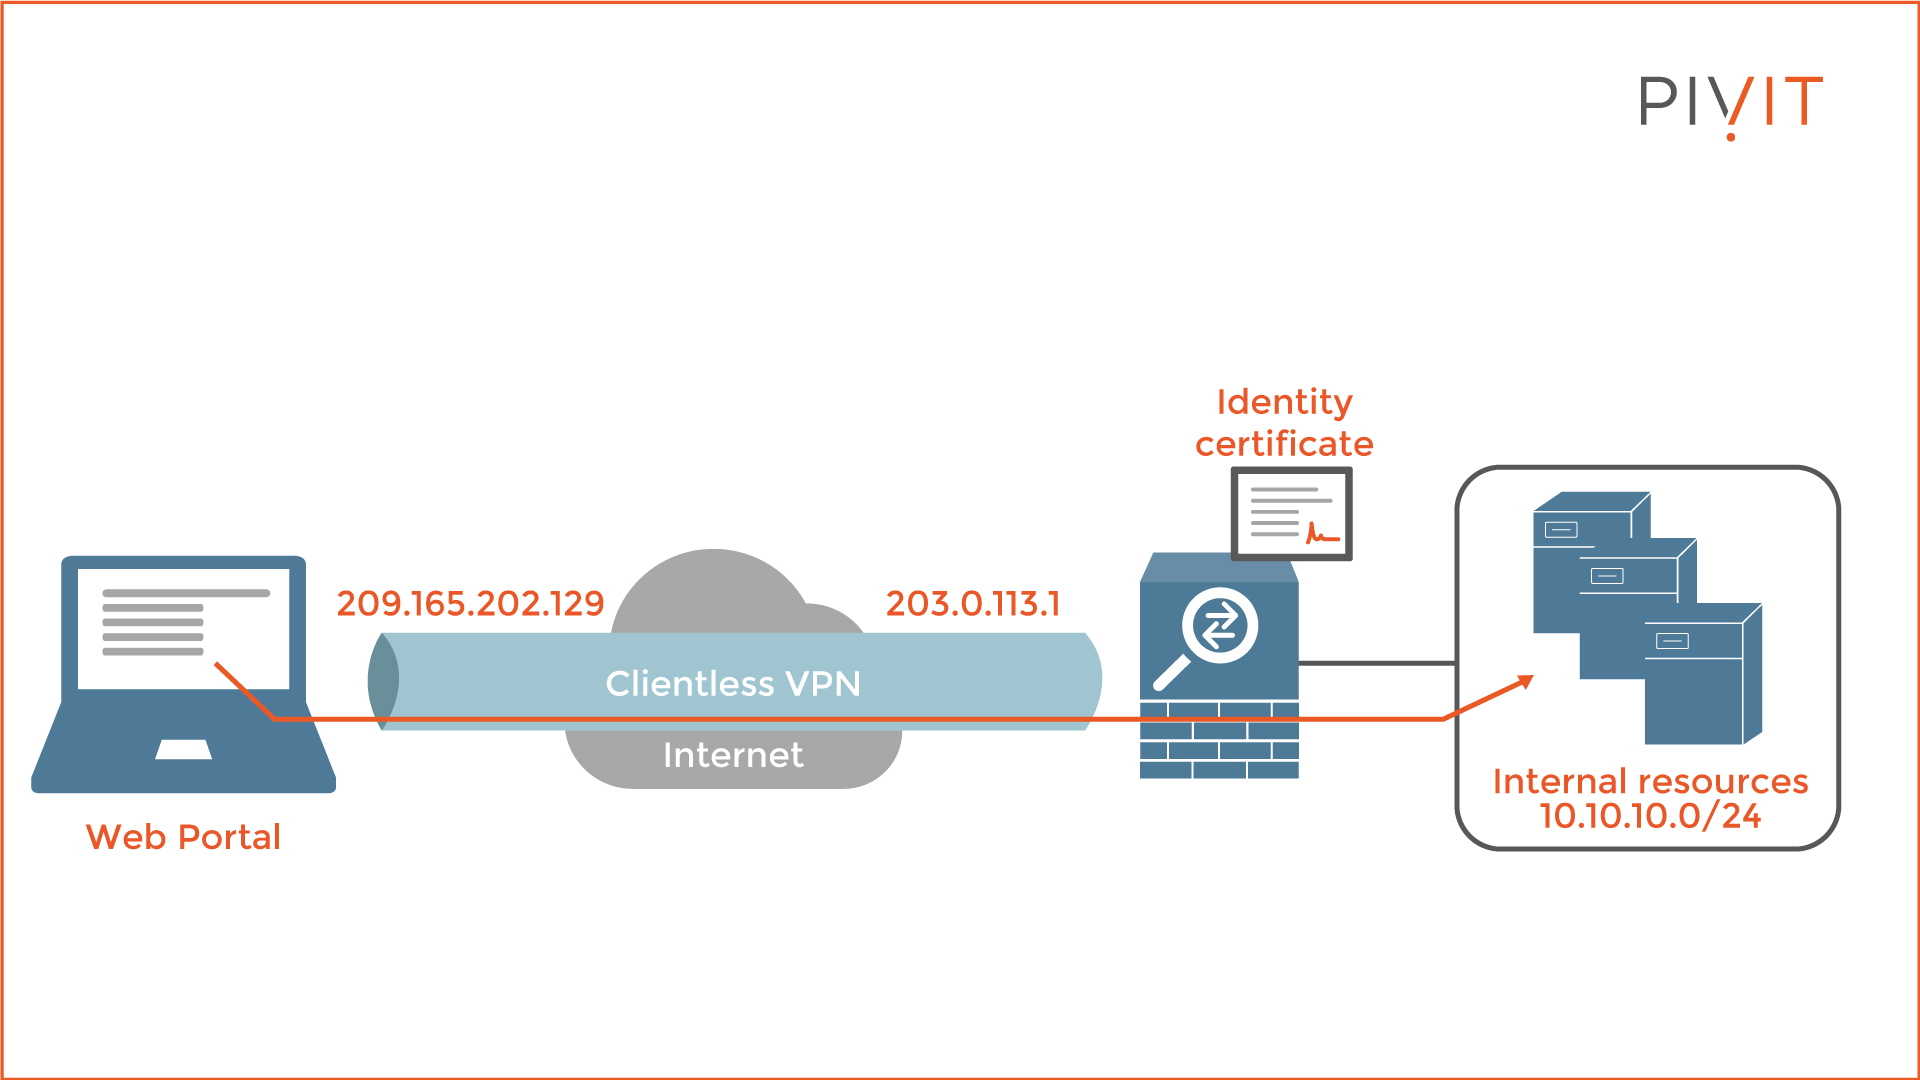 A remote user through a TLS-enabled web browser creates a VPN connection to Cisco ASA to access internal resources behind the firewall